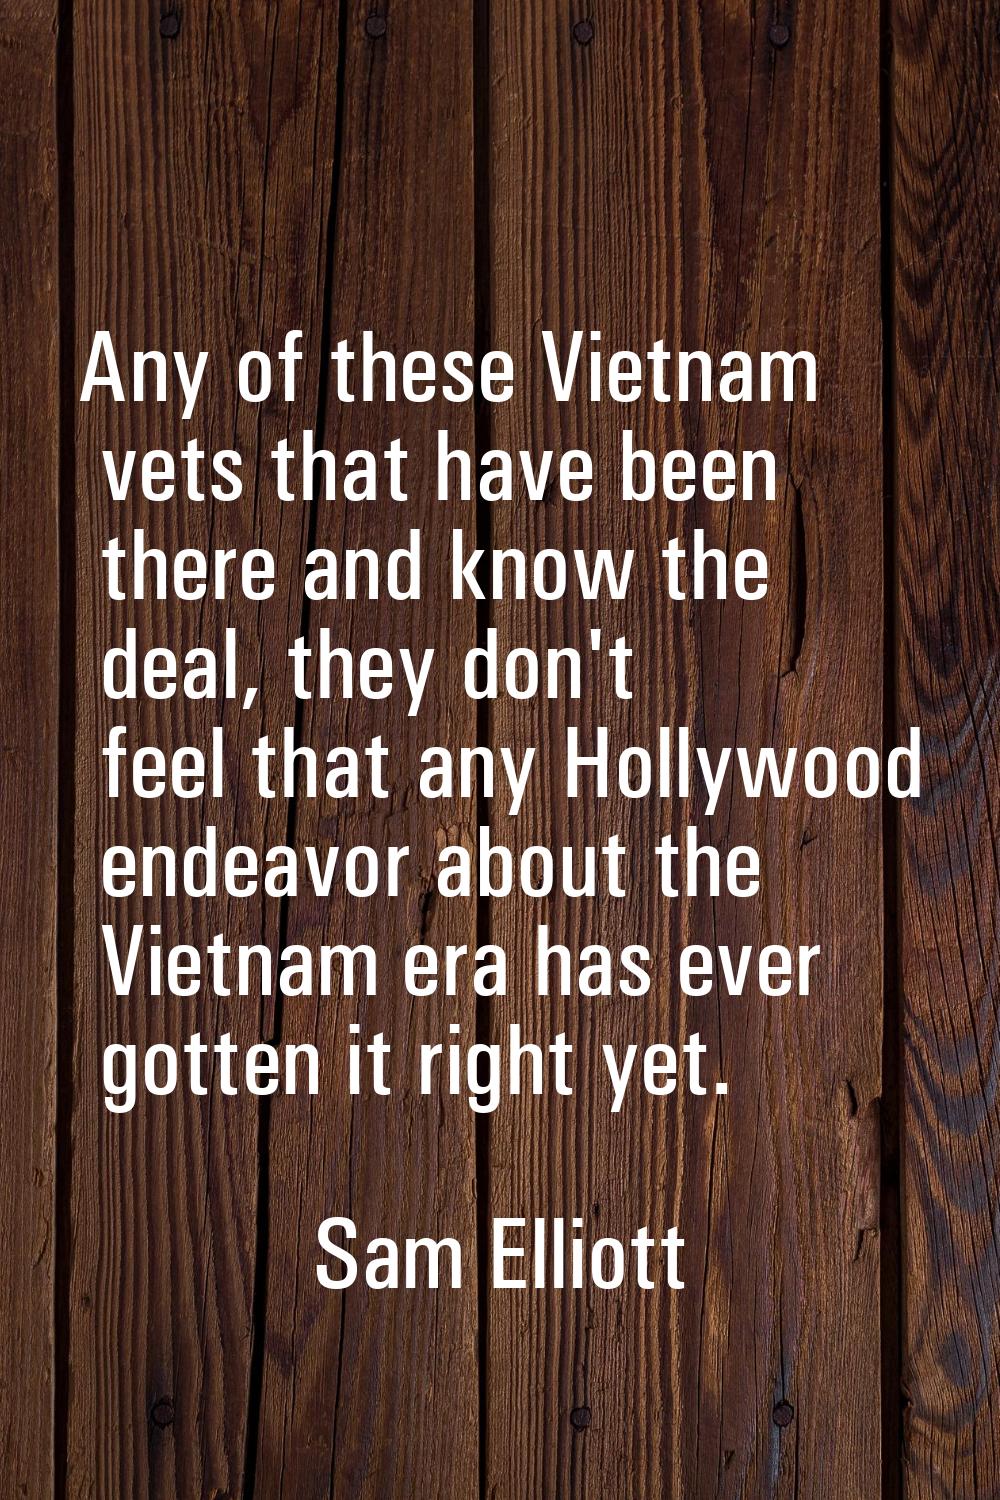 Any of these Vietnam vets that have been there and know the deal, they don't feel that any Hollywoo